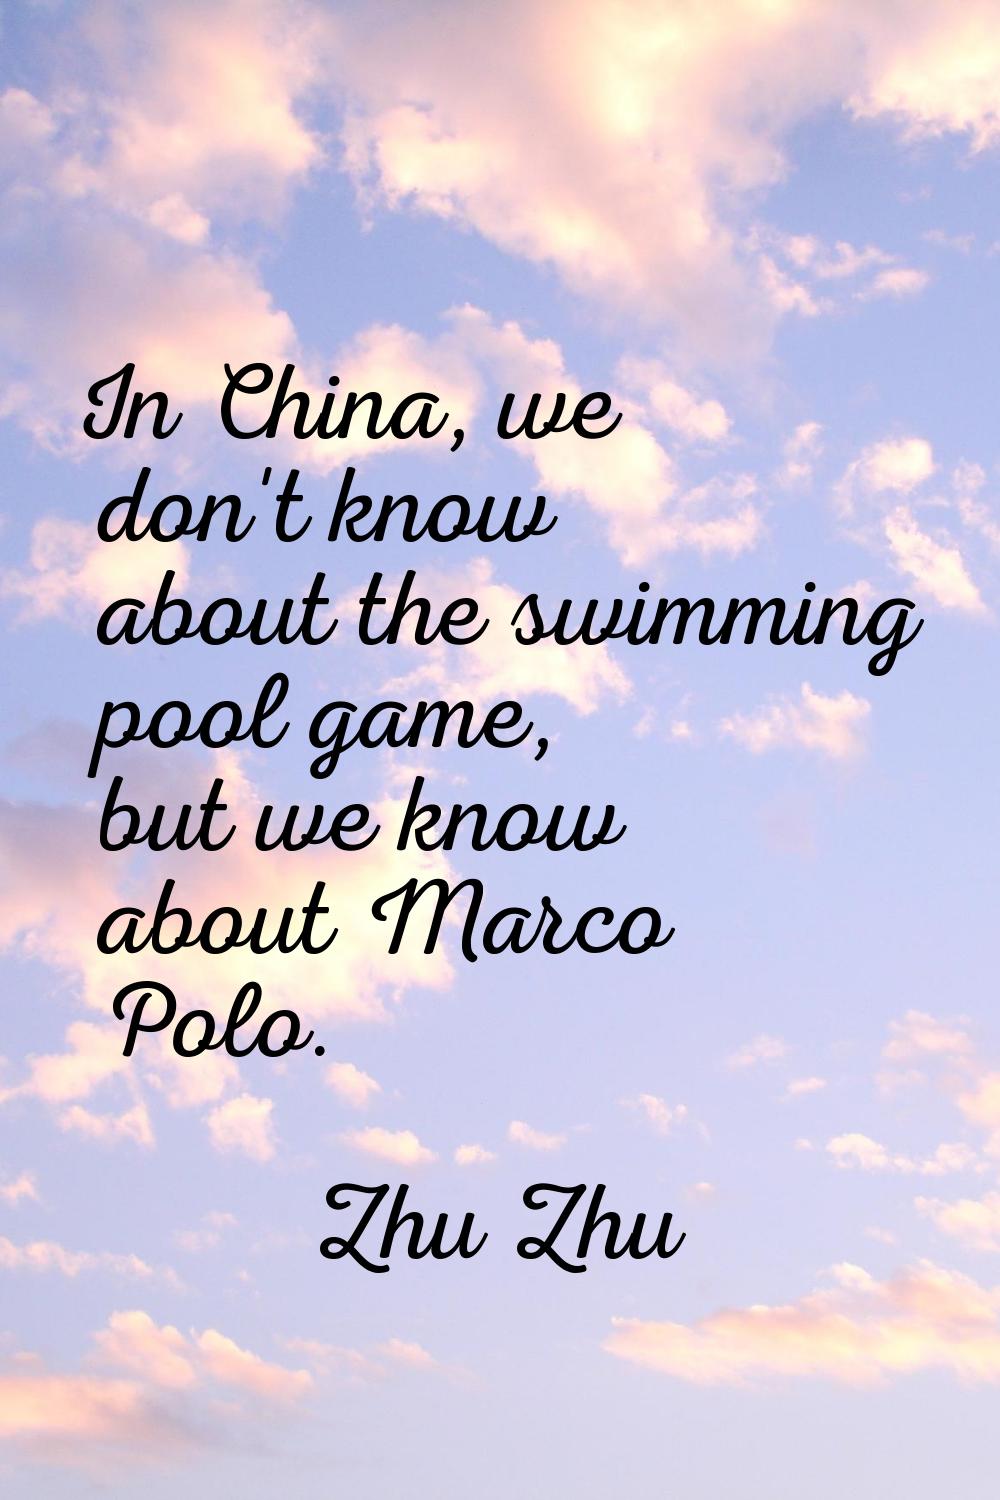 In China, we don't know about the swimming pool game, but we know about Marco Polo.